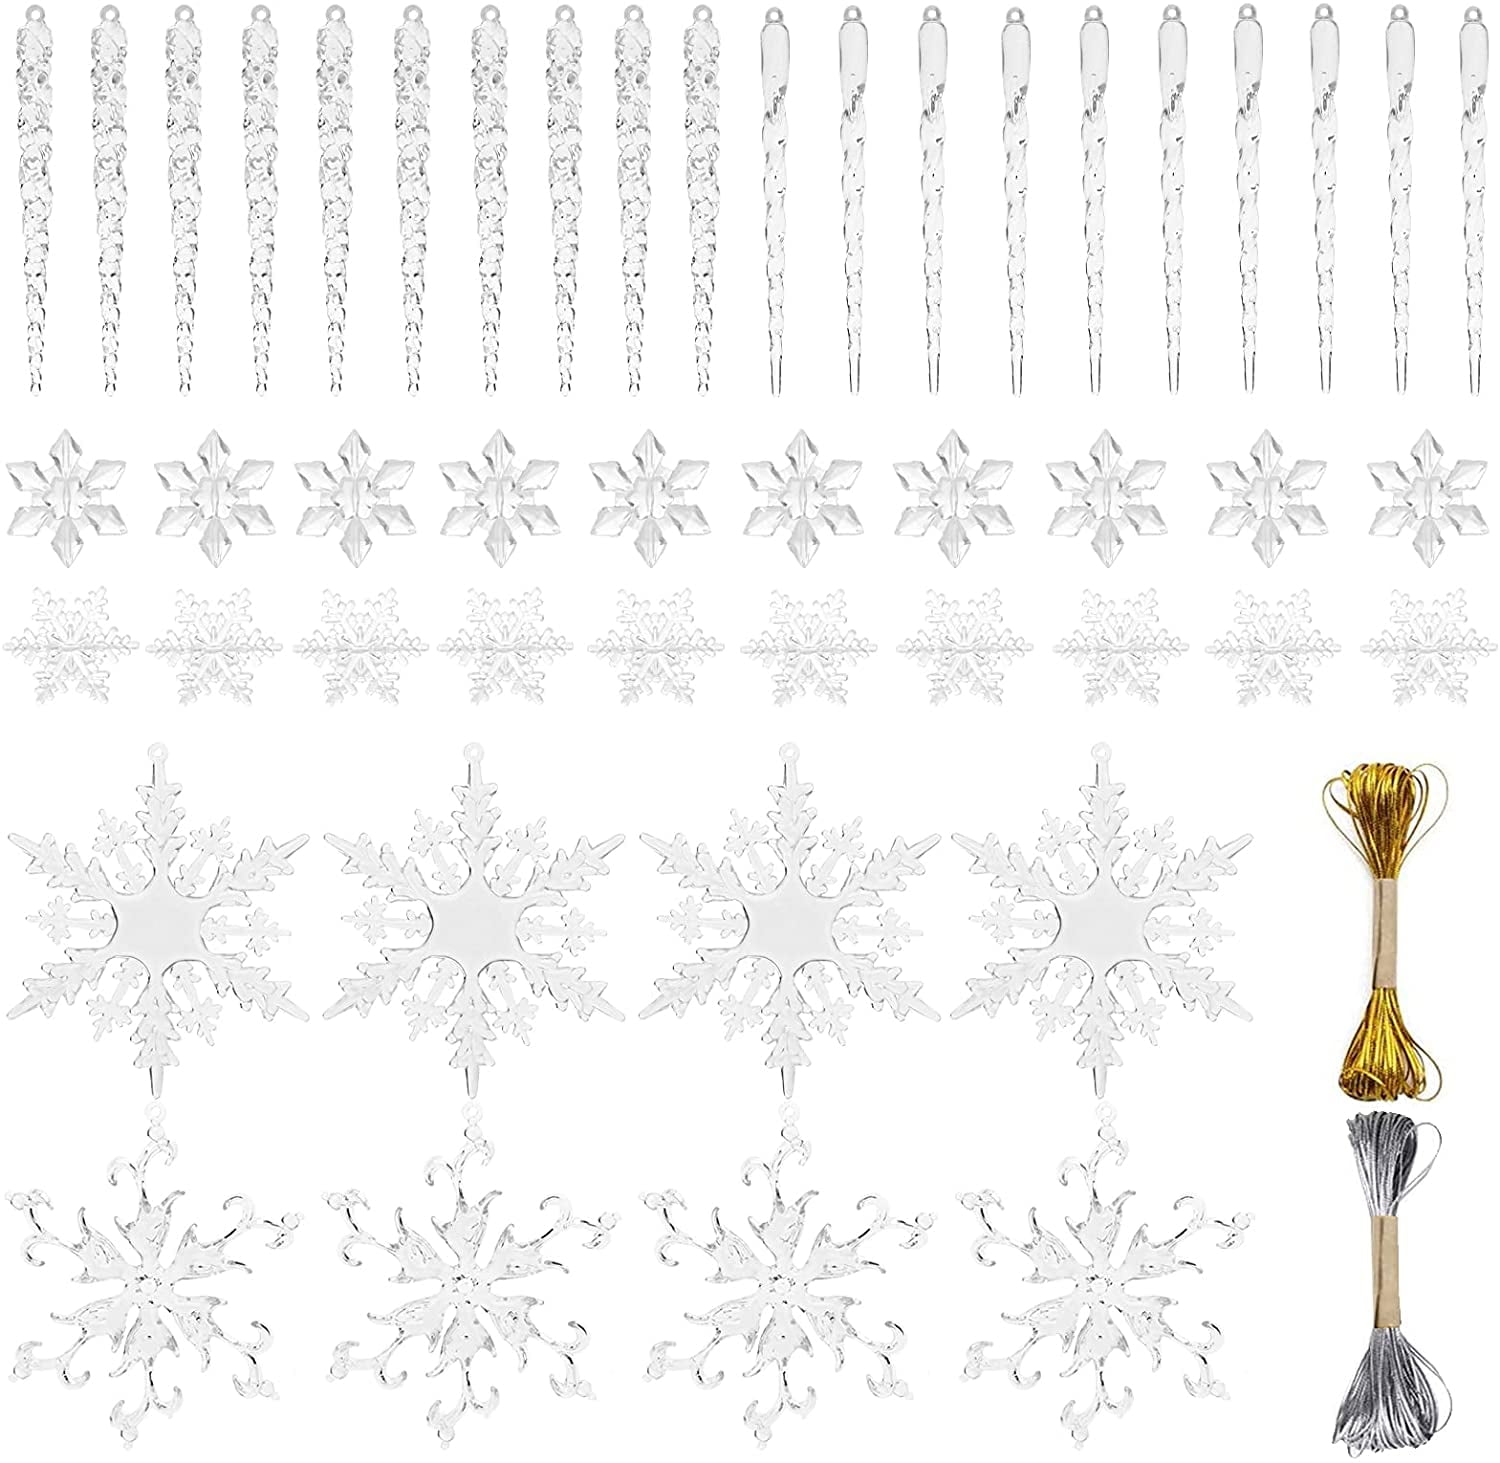 56 PCS Icicles Ornaments Set Clear Snowflake Acrylic Christmas Ornaments for Christmas Tree Santa Outdoor Party Decoration Craft Projects VGoodall Christmas Snowflake Decorations